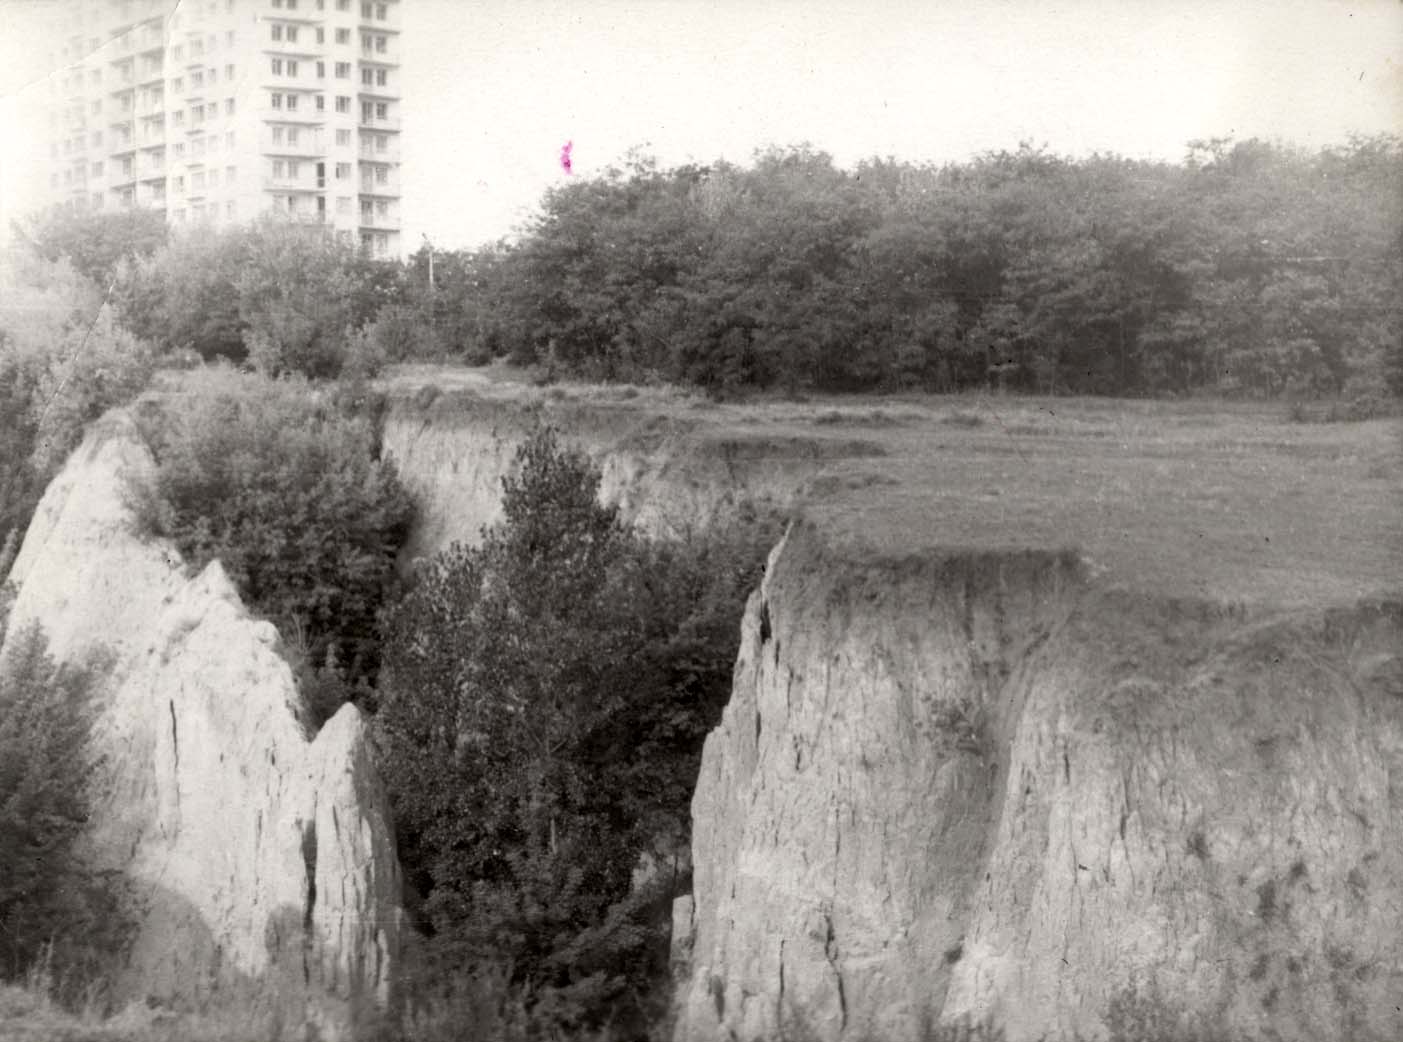 Ravine where the Jews of Dnepropetrovsk were murdered on October 13-15, 1941